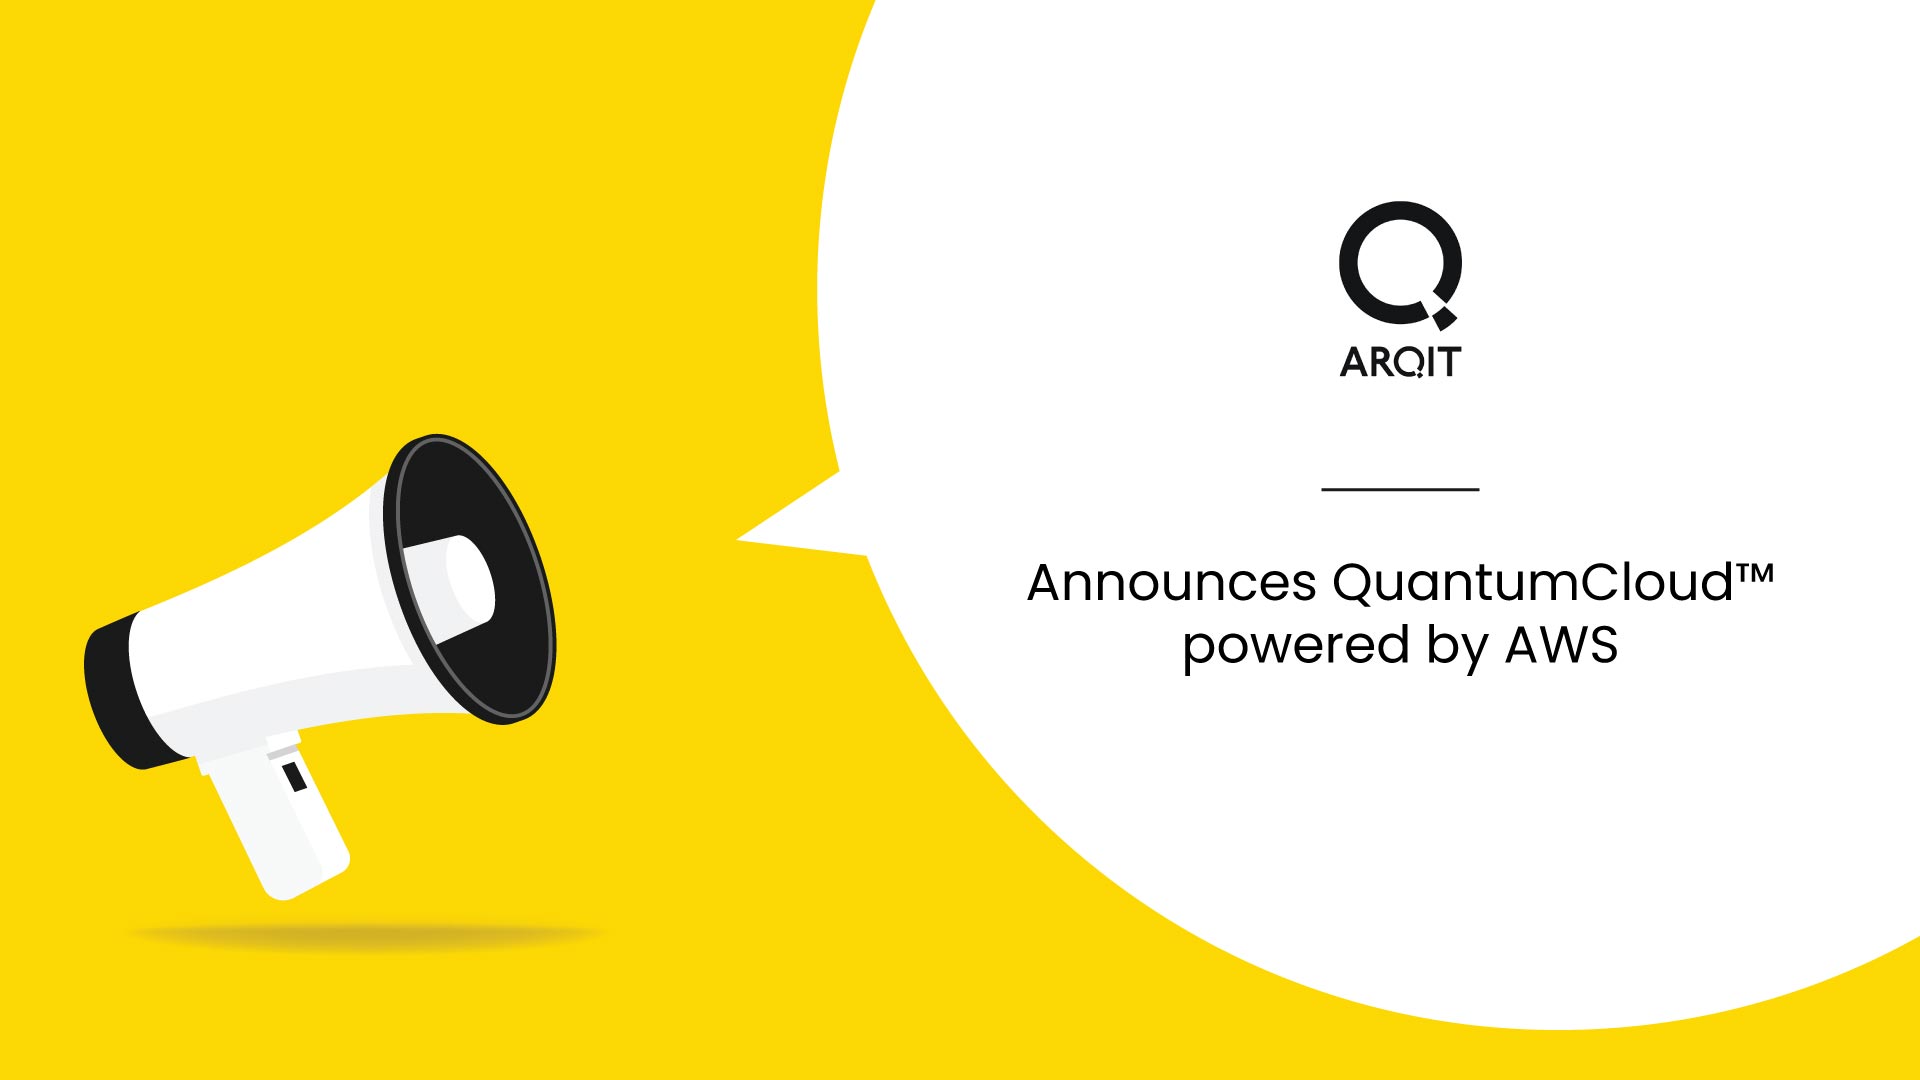 Arqit announces QuantumCloud™ powered by AWS